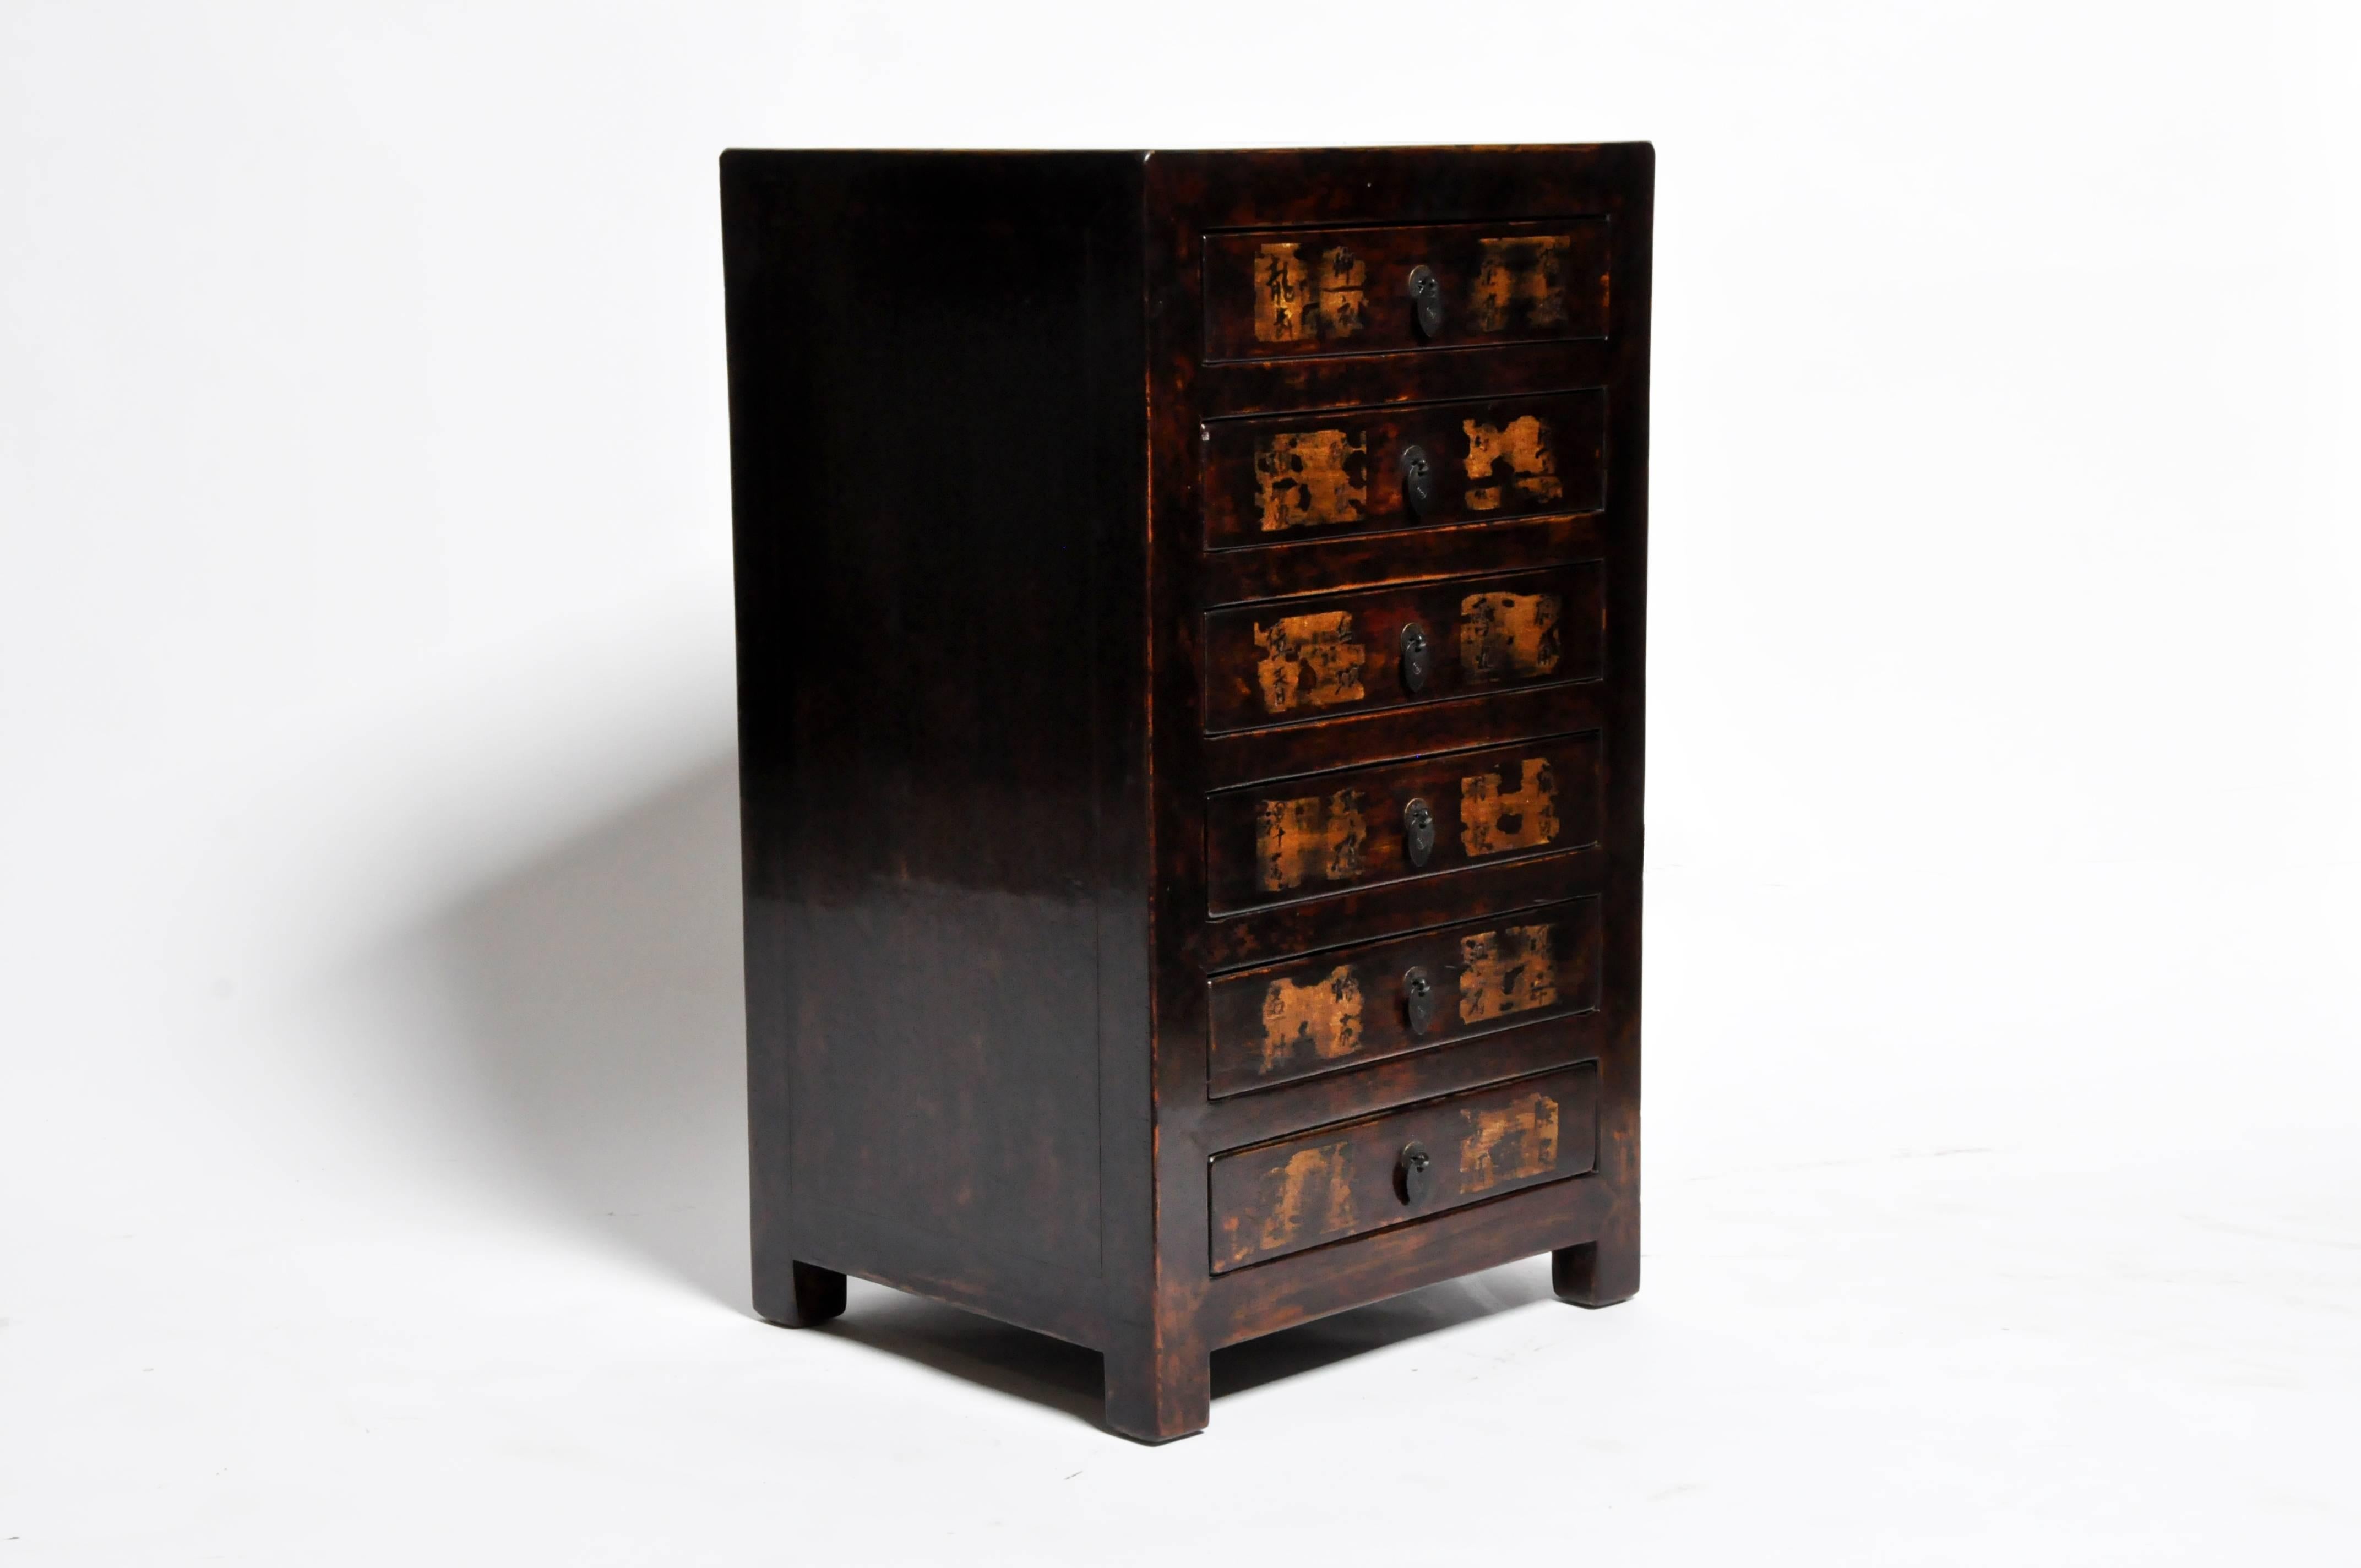 This pair of side chests are from Henan, China and were made from reclaimed cypress wood. Each chest has six drawers with Chinese characters describing their original contents. The chests features mortise and tenon joinery and you can also customize